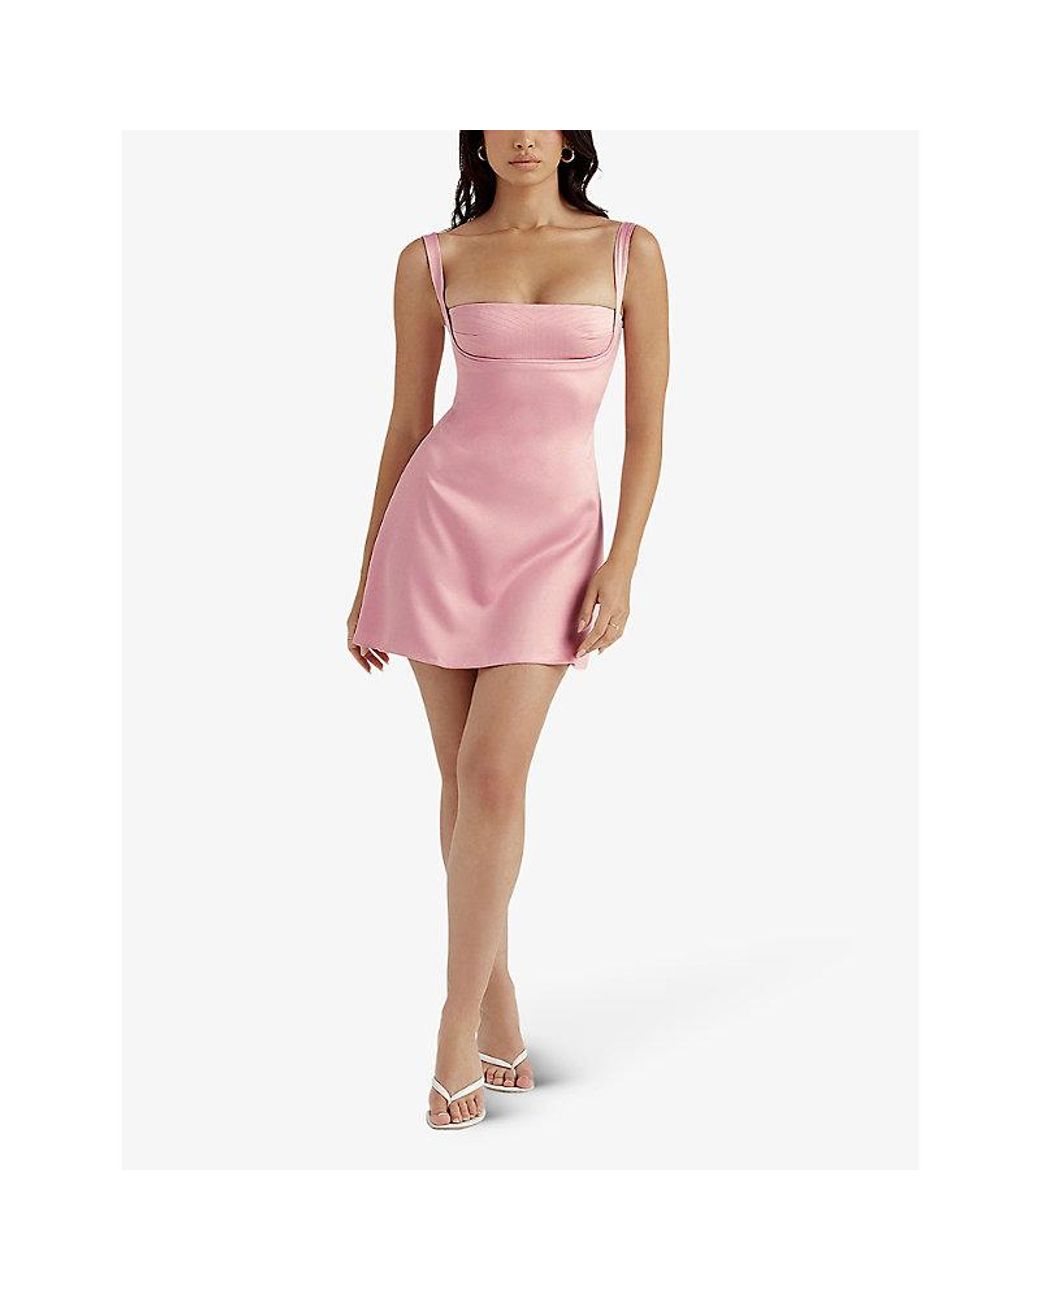 house of cb pink dress